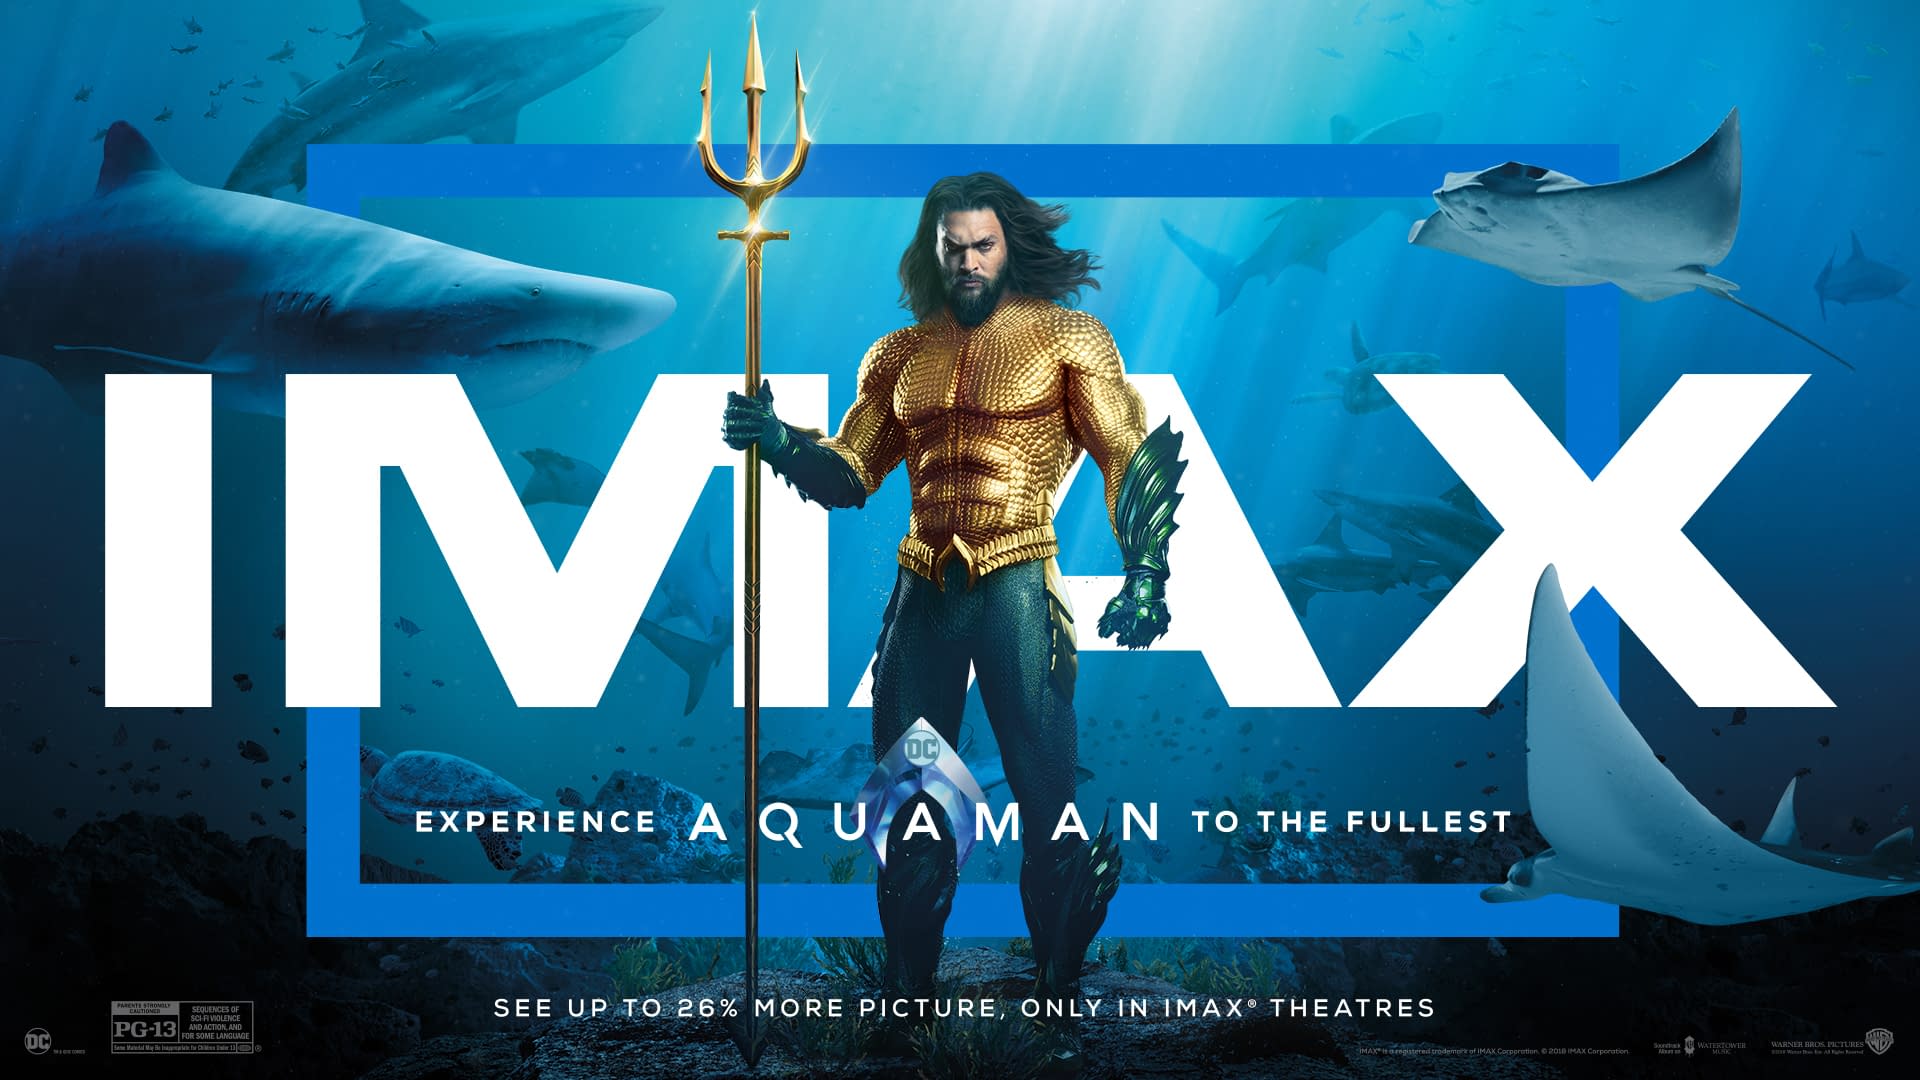 IMAX Releases Exclusive Art for Aquaman